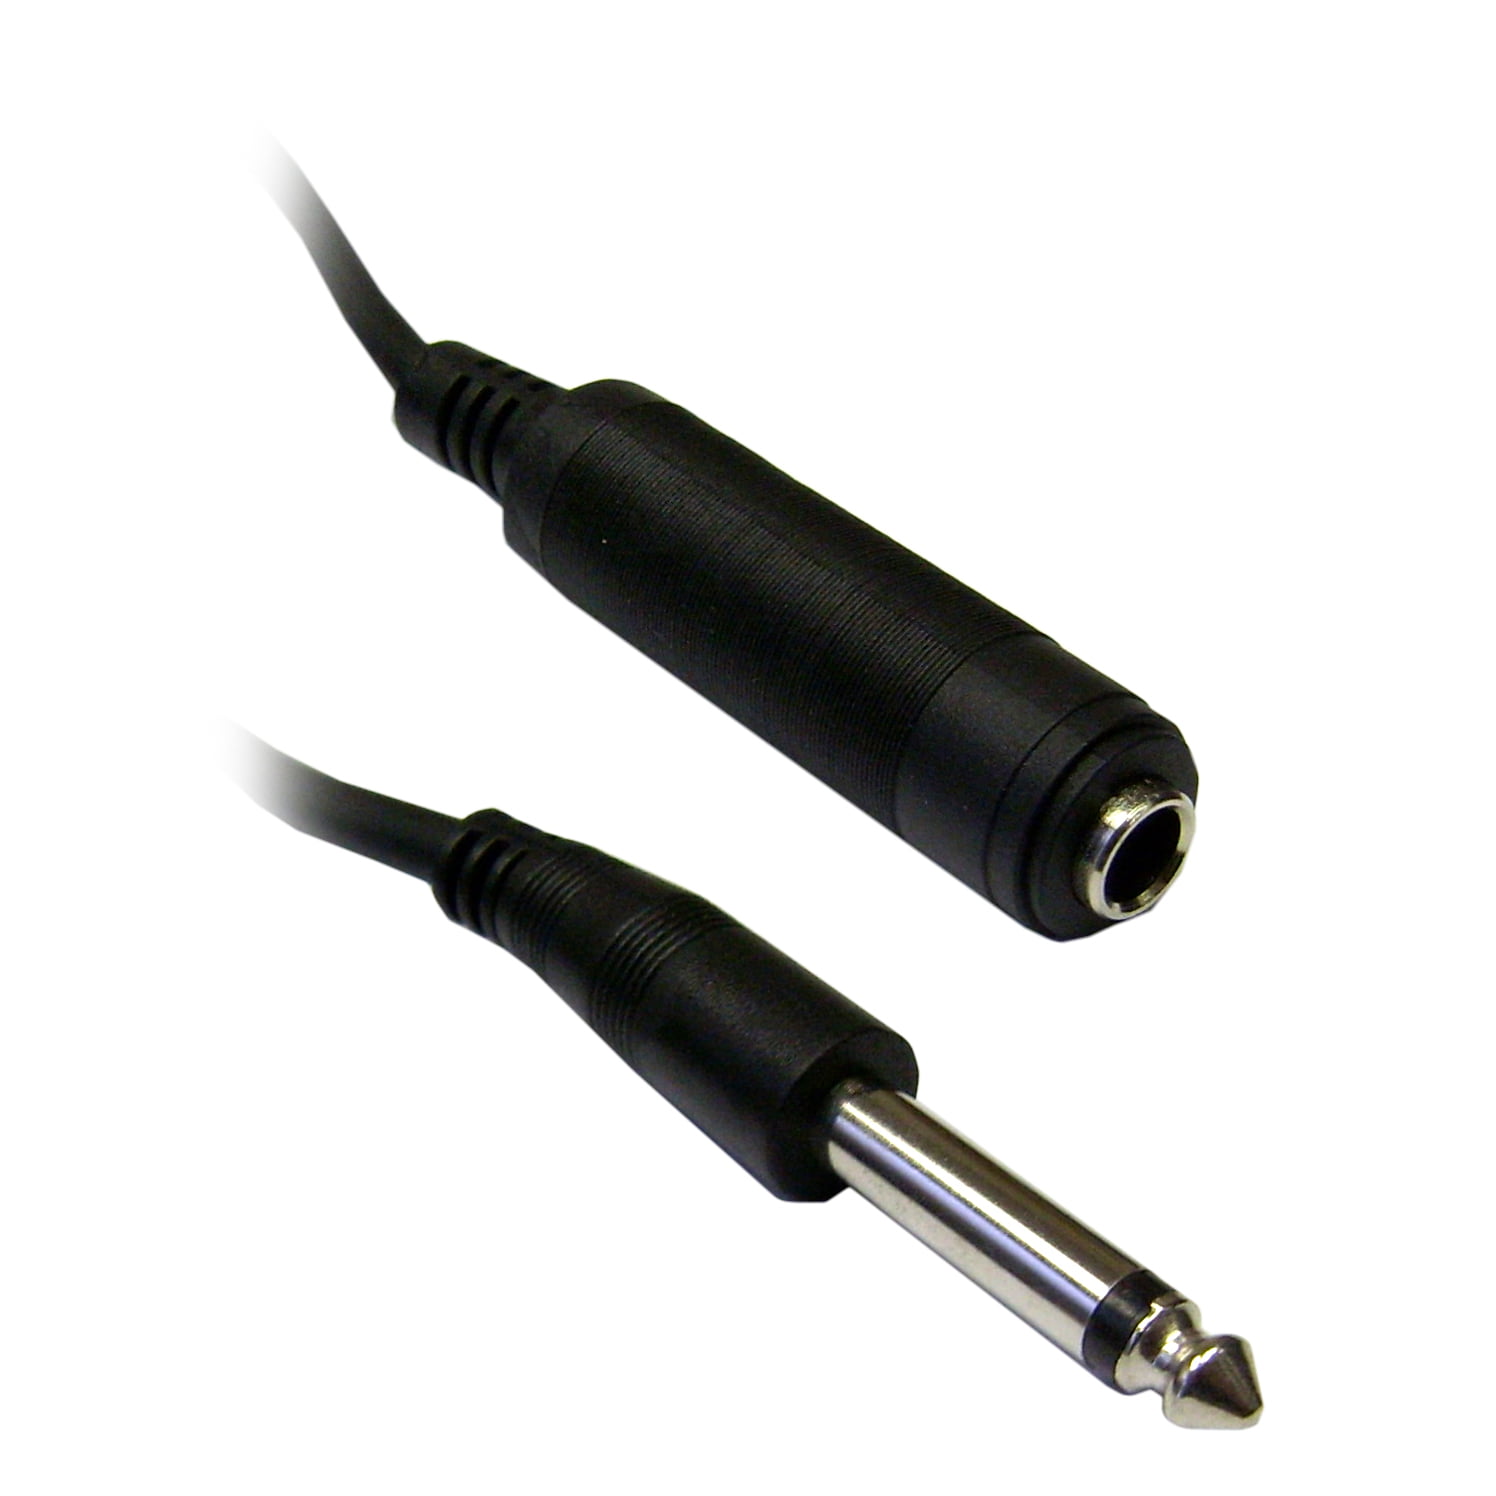 6 feet SF Cable 1/4 Stereo Male to Male Cable 